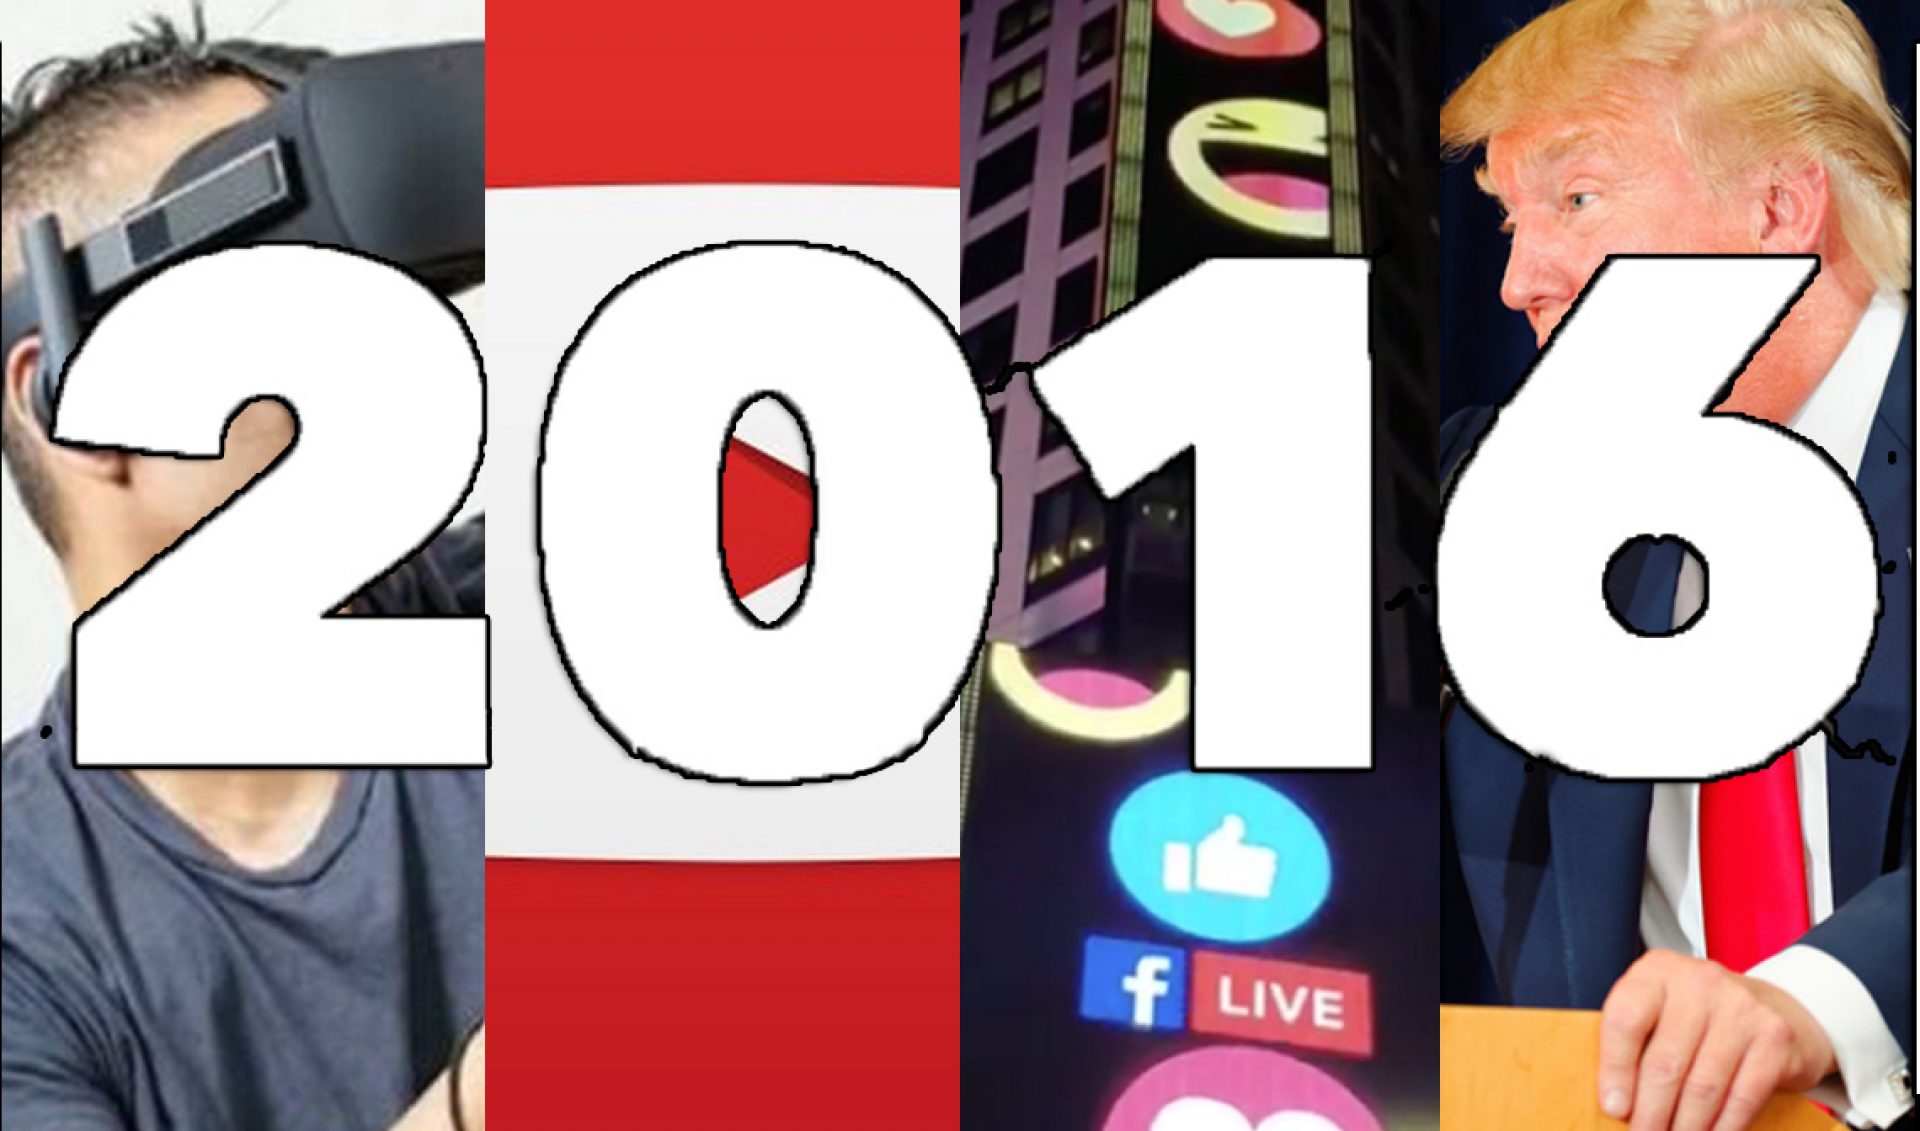 Live Streaming, The Election, YouTube Aspirations, And The Other Trends That Defined Online Video In 2016